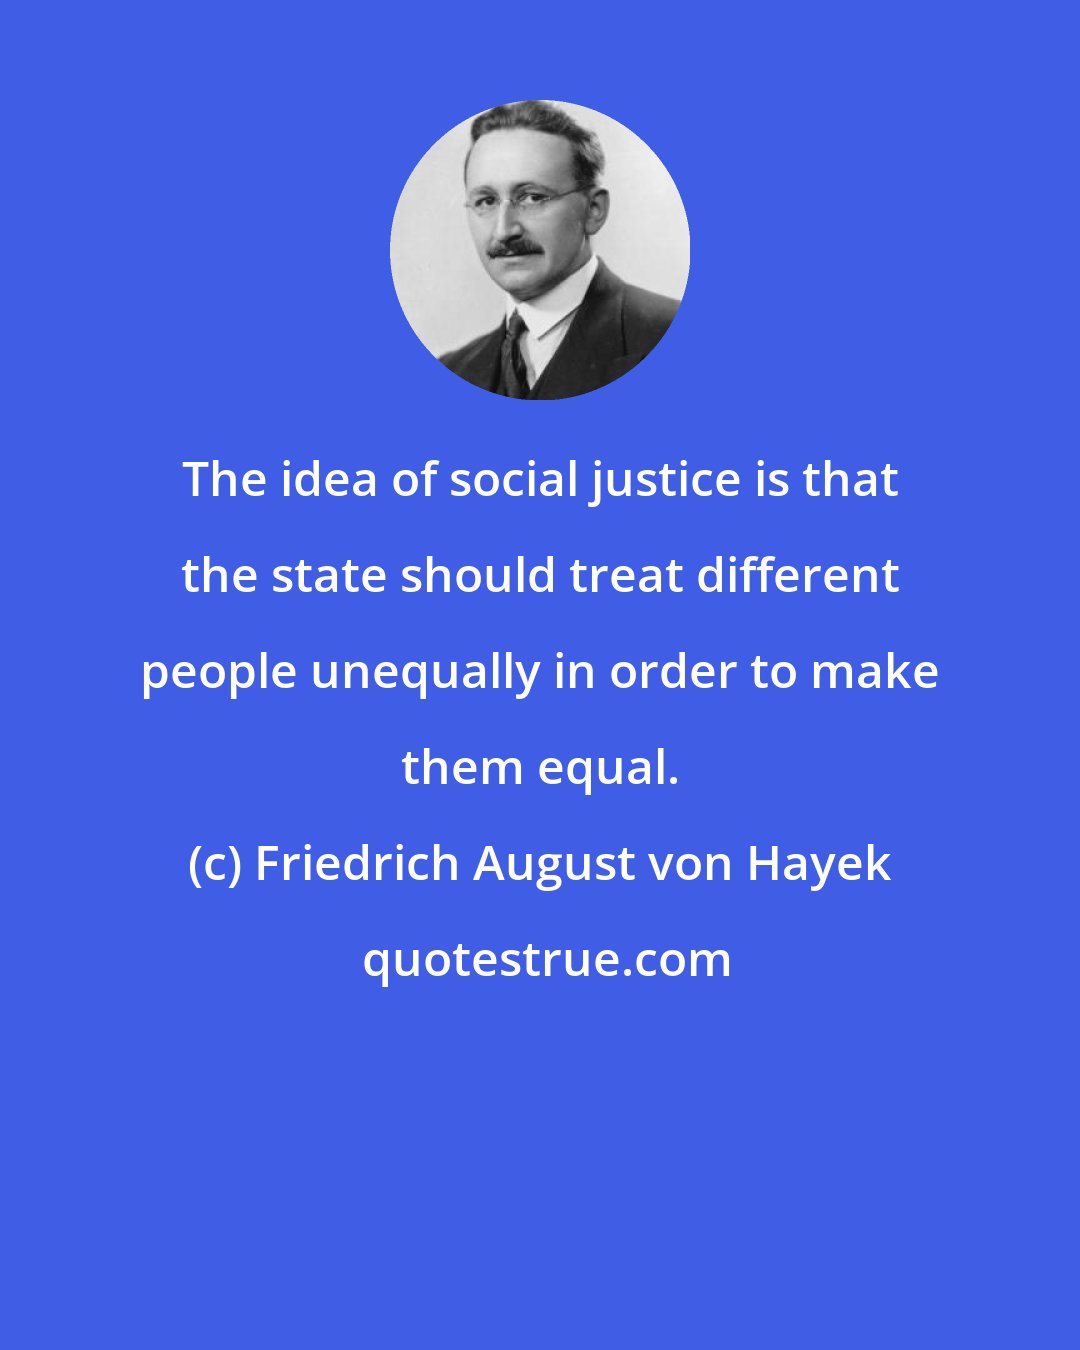 Friedrich August von Hayek: The idea of social justice is that the state should treat different people unequally in order to make them equal.